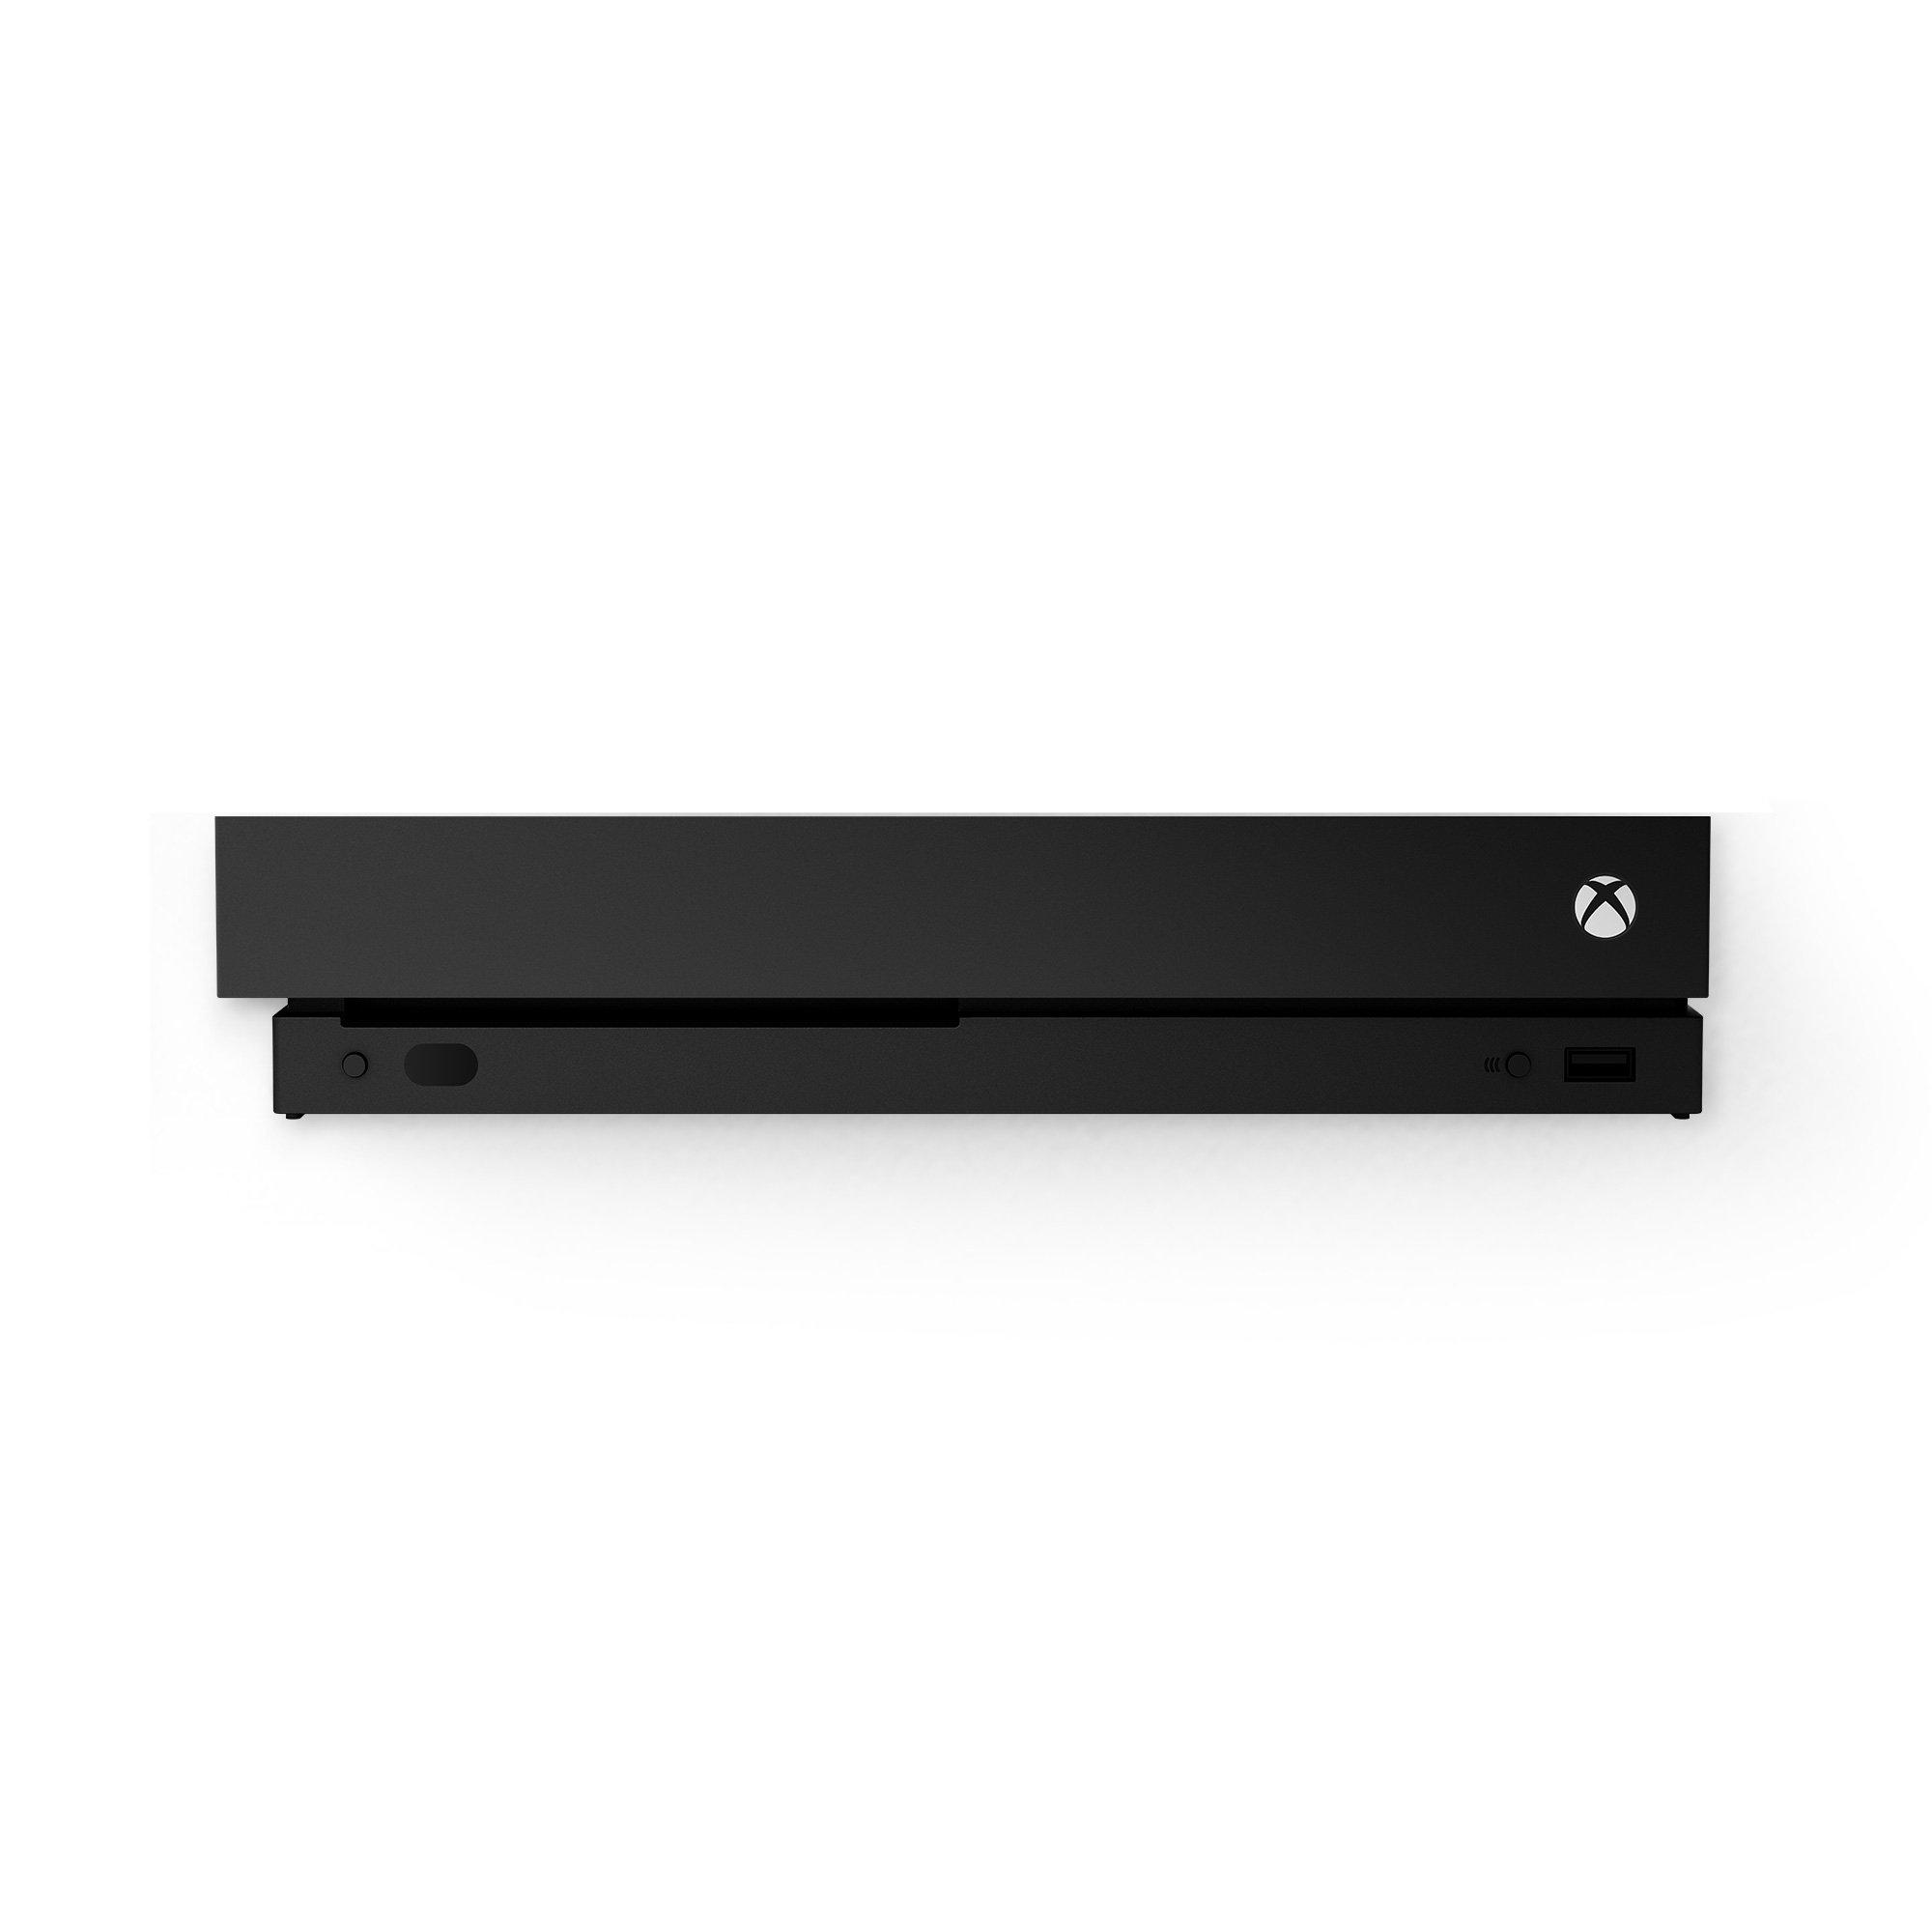 trade in value of xbox one x